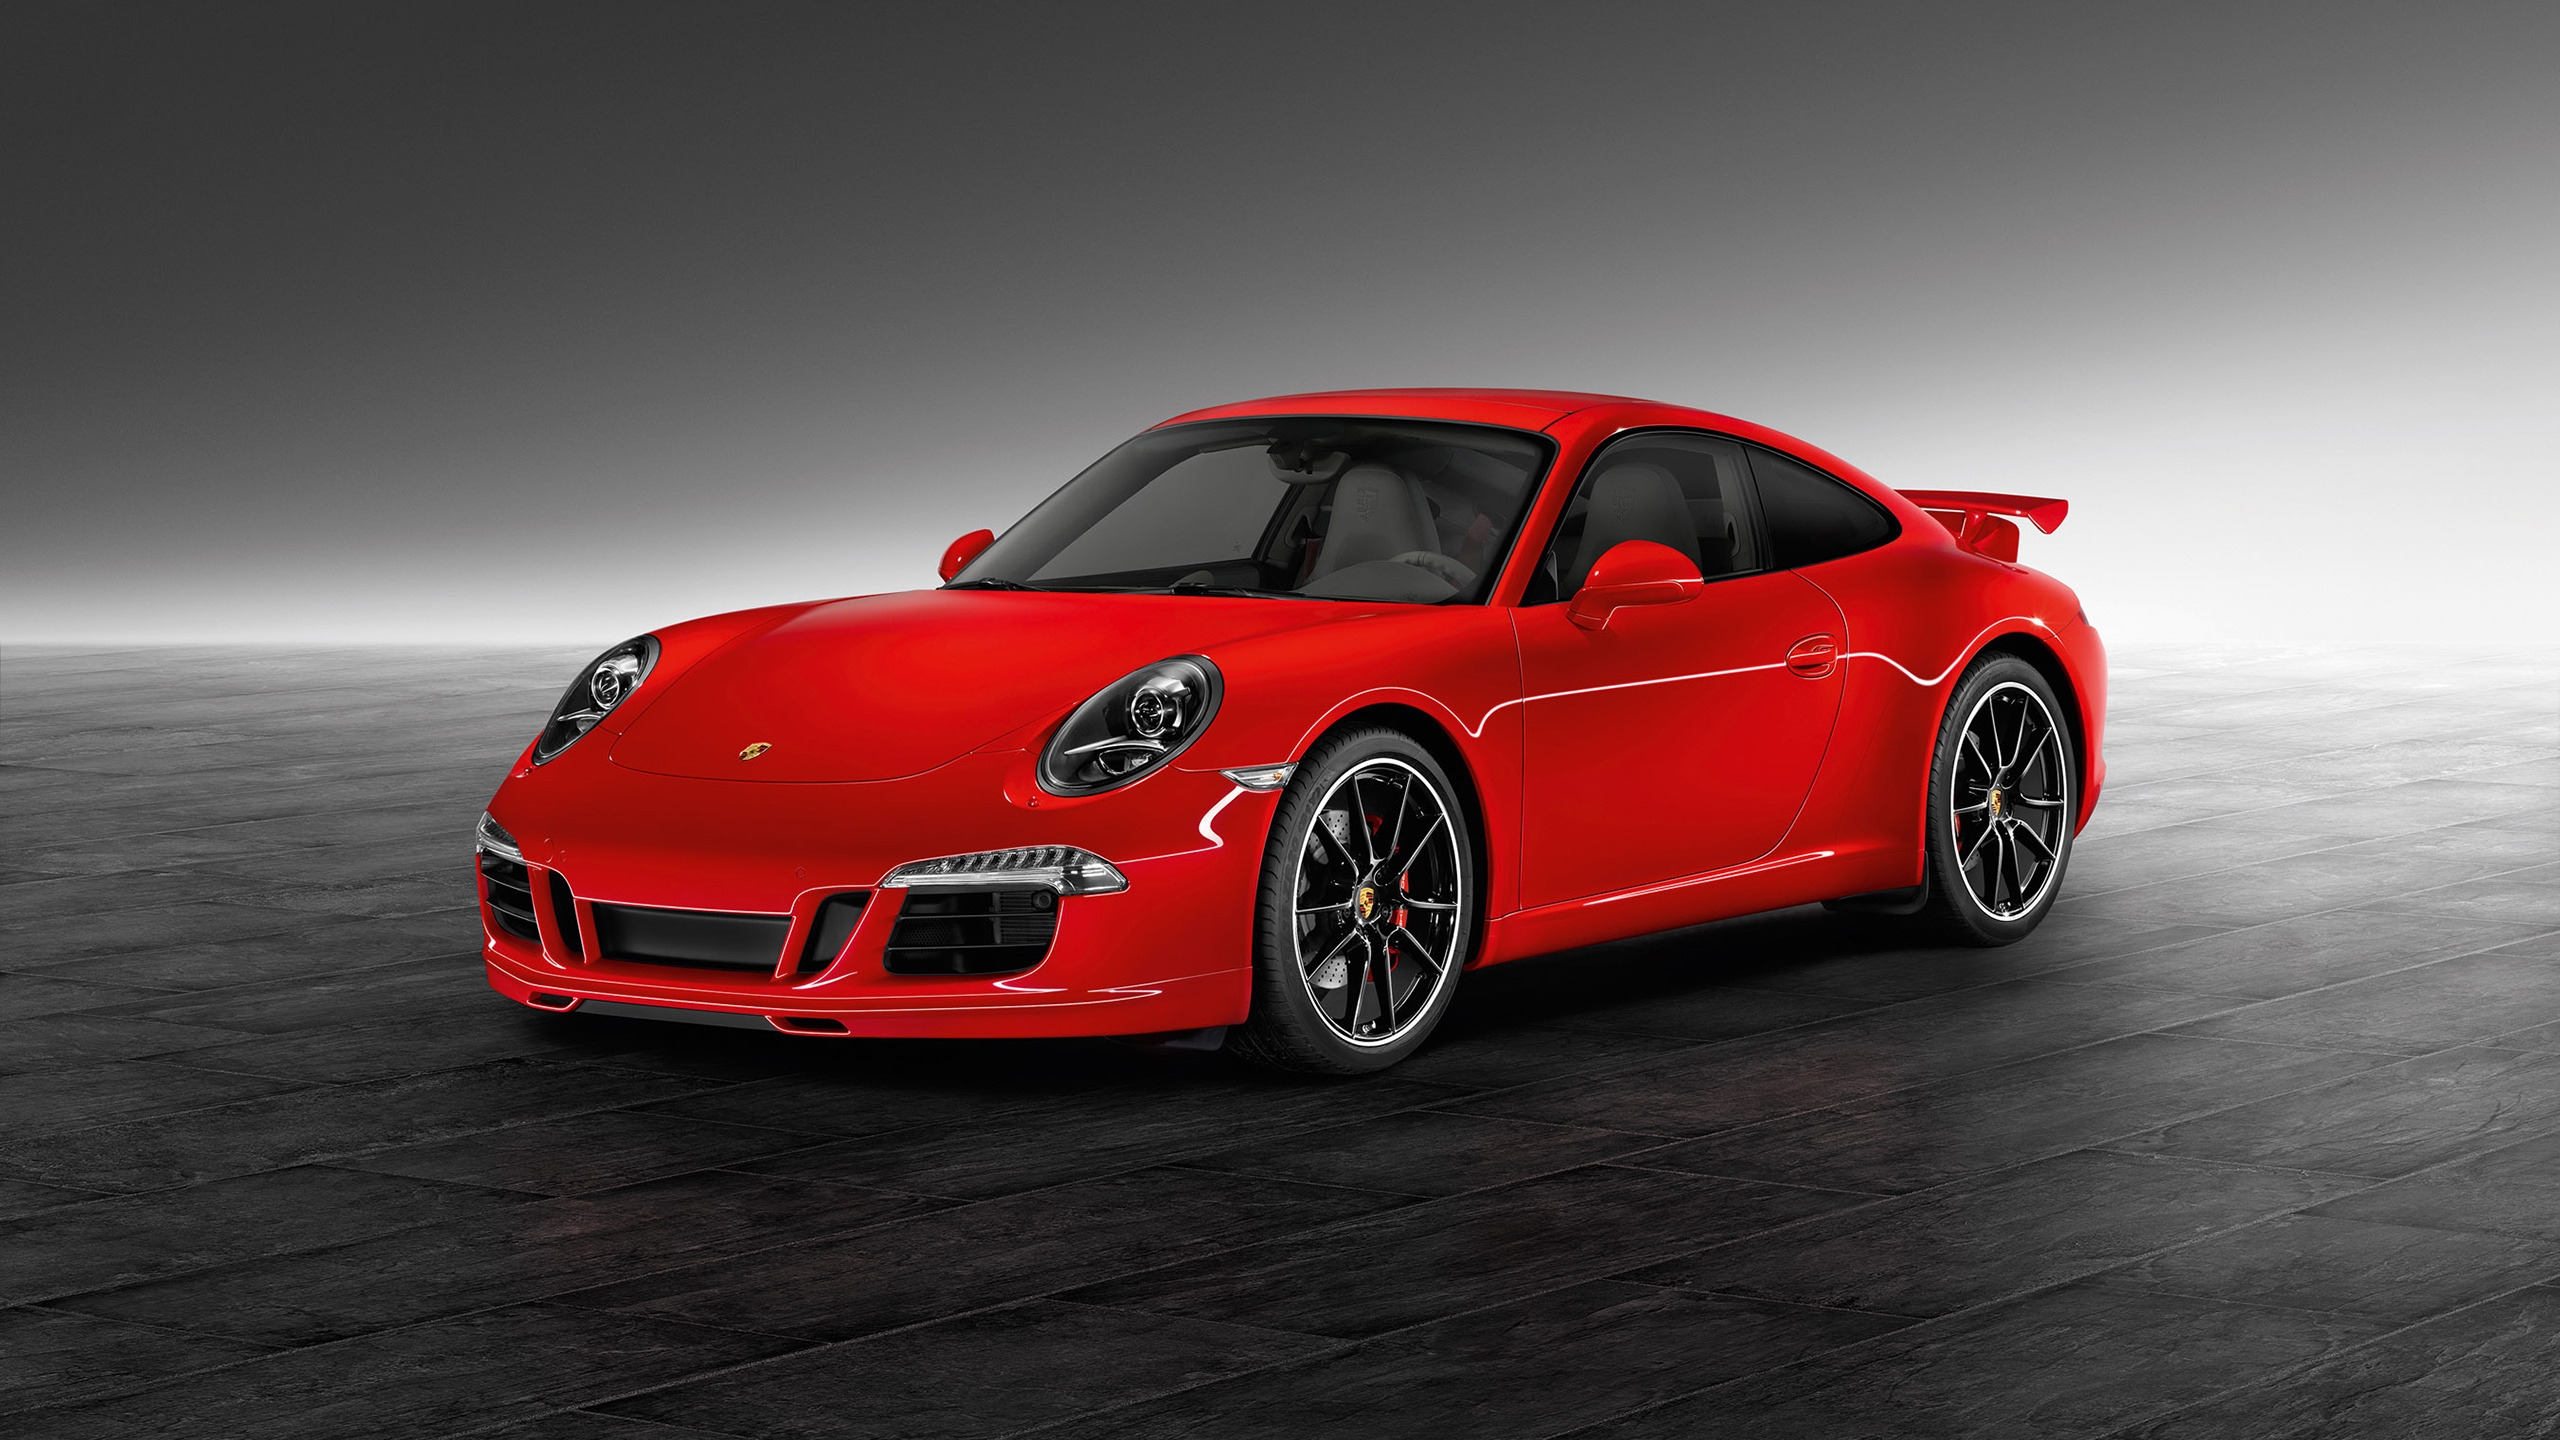 Red 911 Carrera S for 2560x1440 HDTV resolution